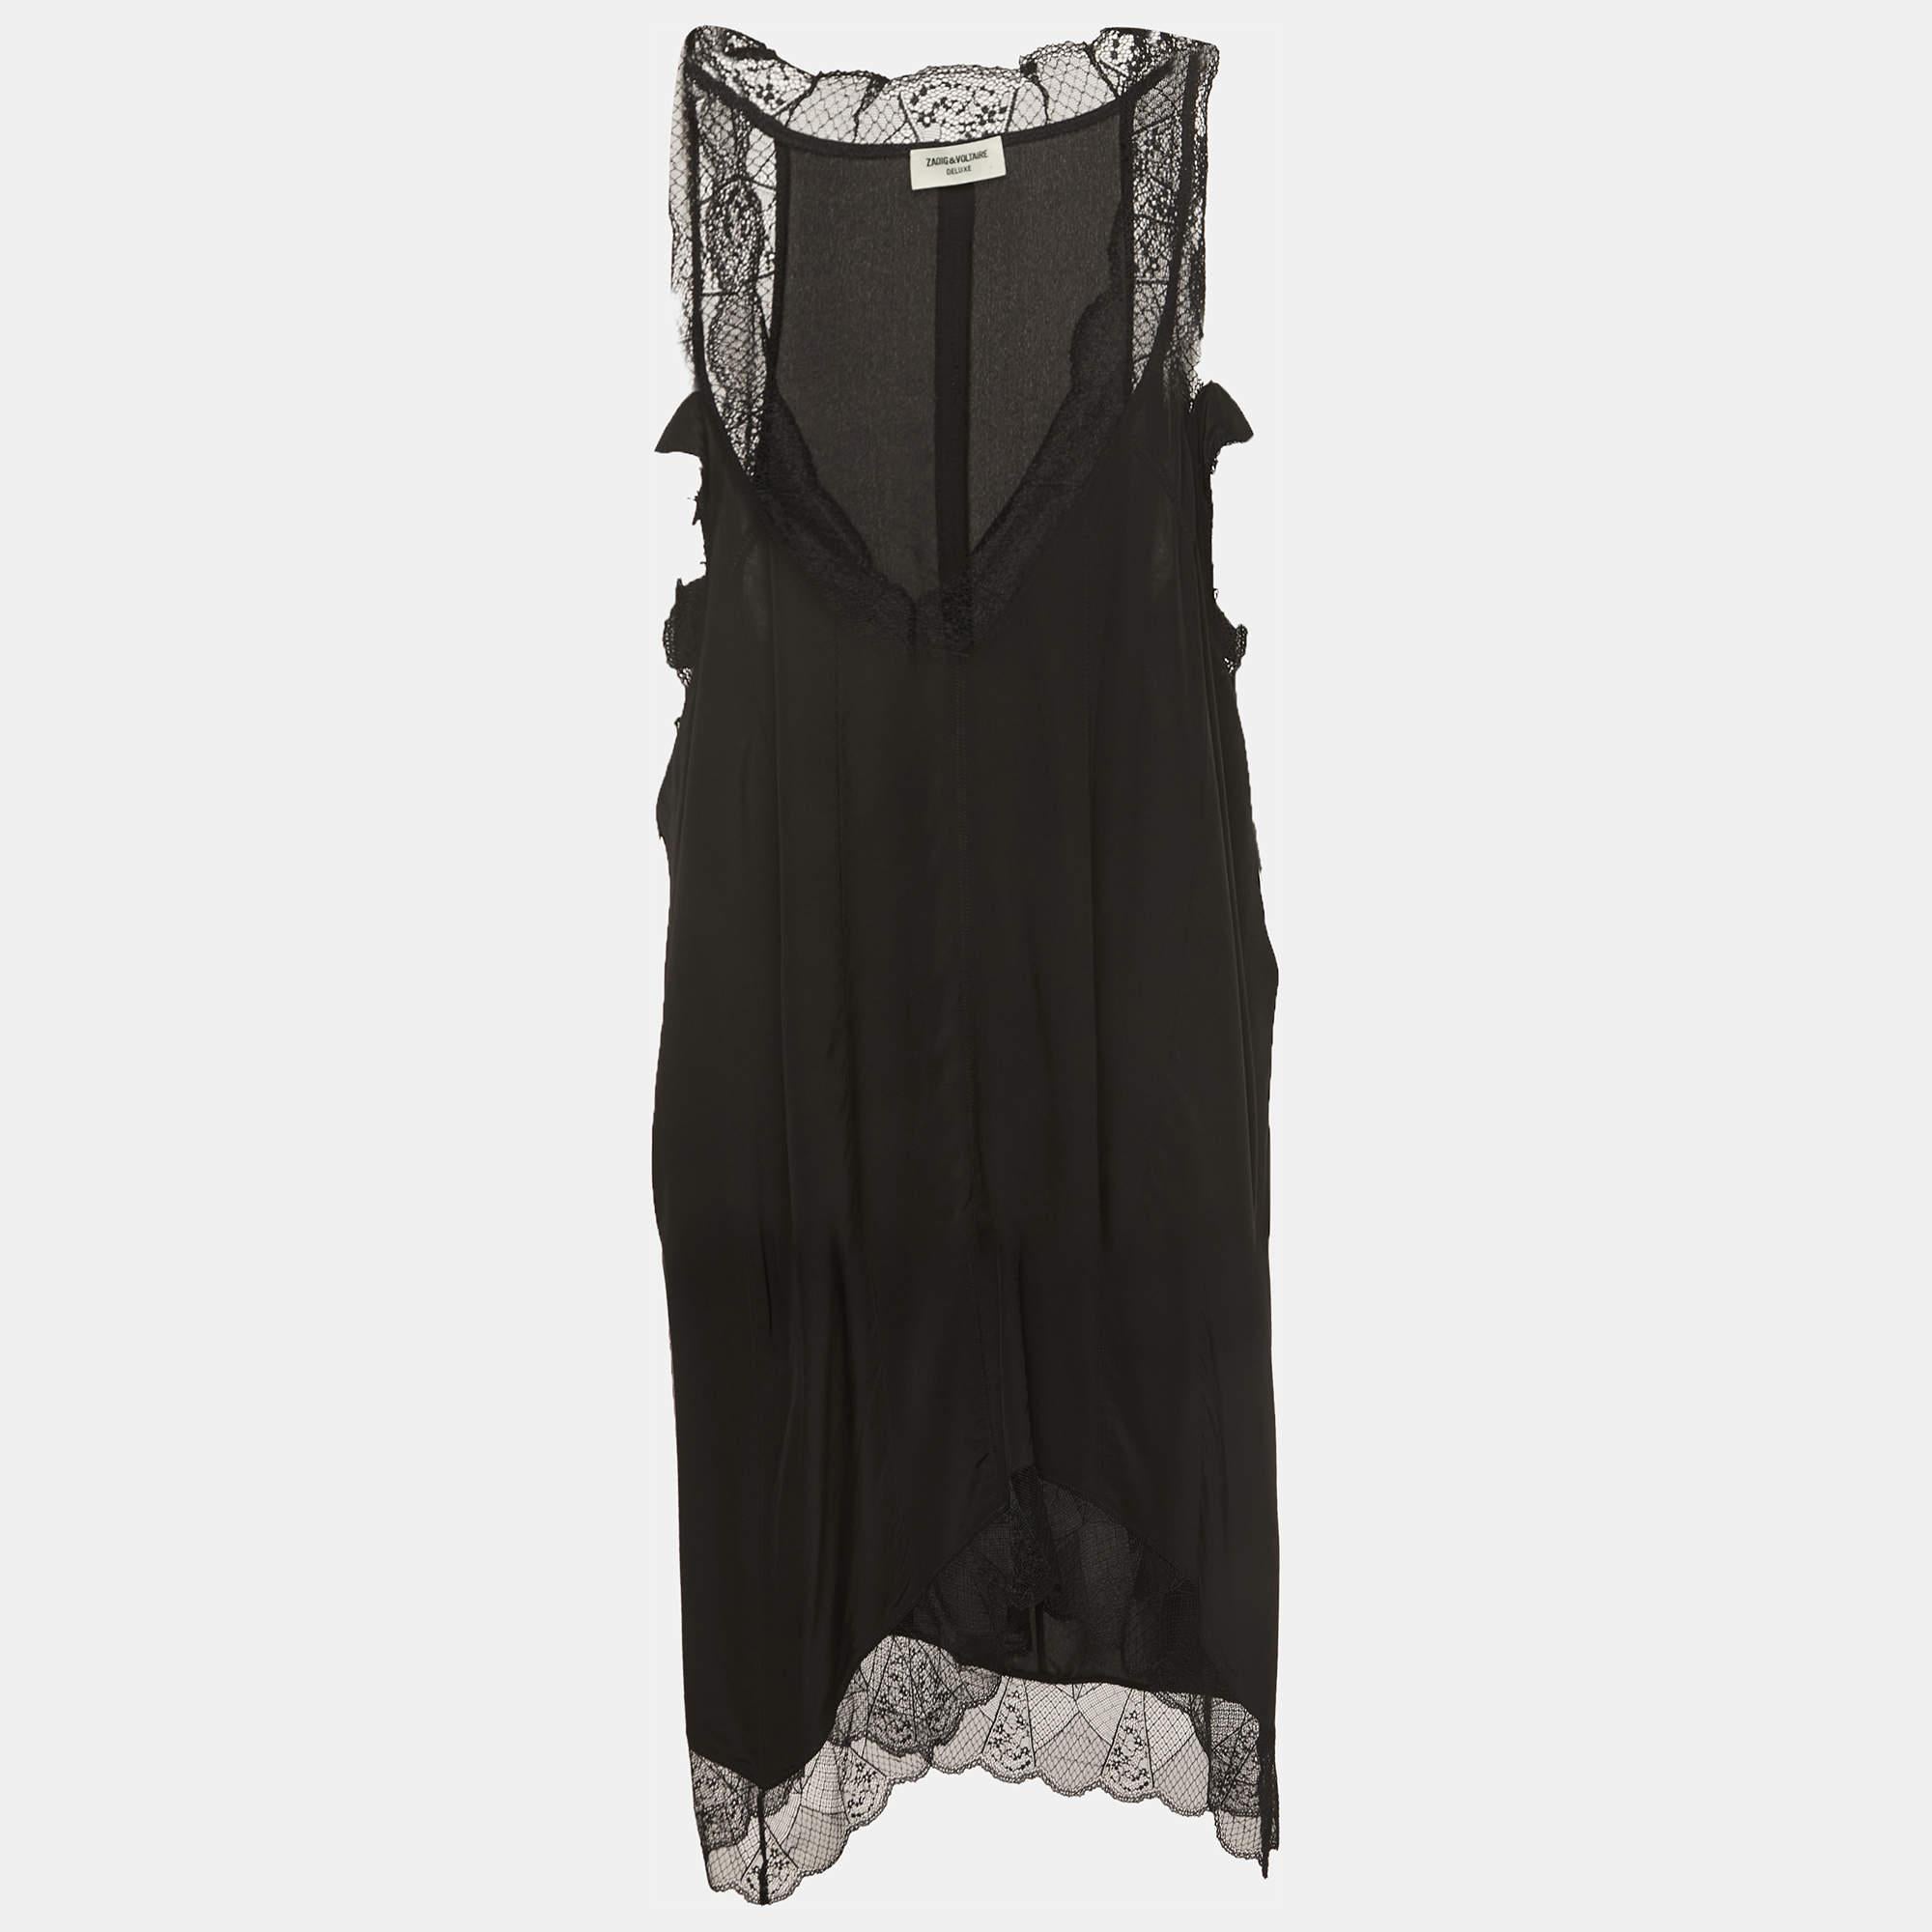 Masterful tailoring and timeless appeal characterize this dress from the house of Zadig & Voltaire. Presented in black, it is nothing but pure charm and is a must-have.

